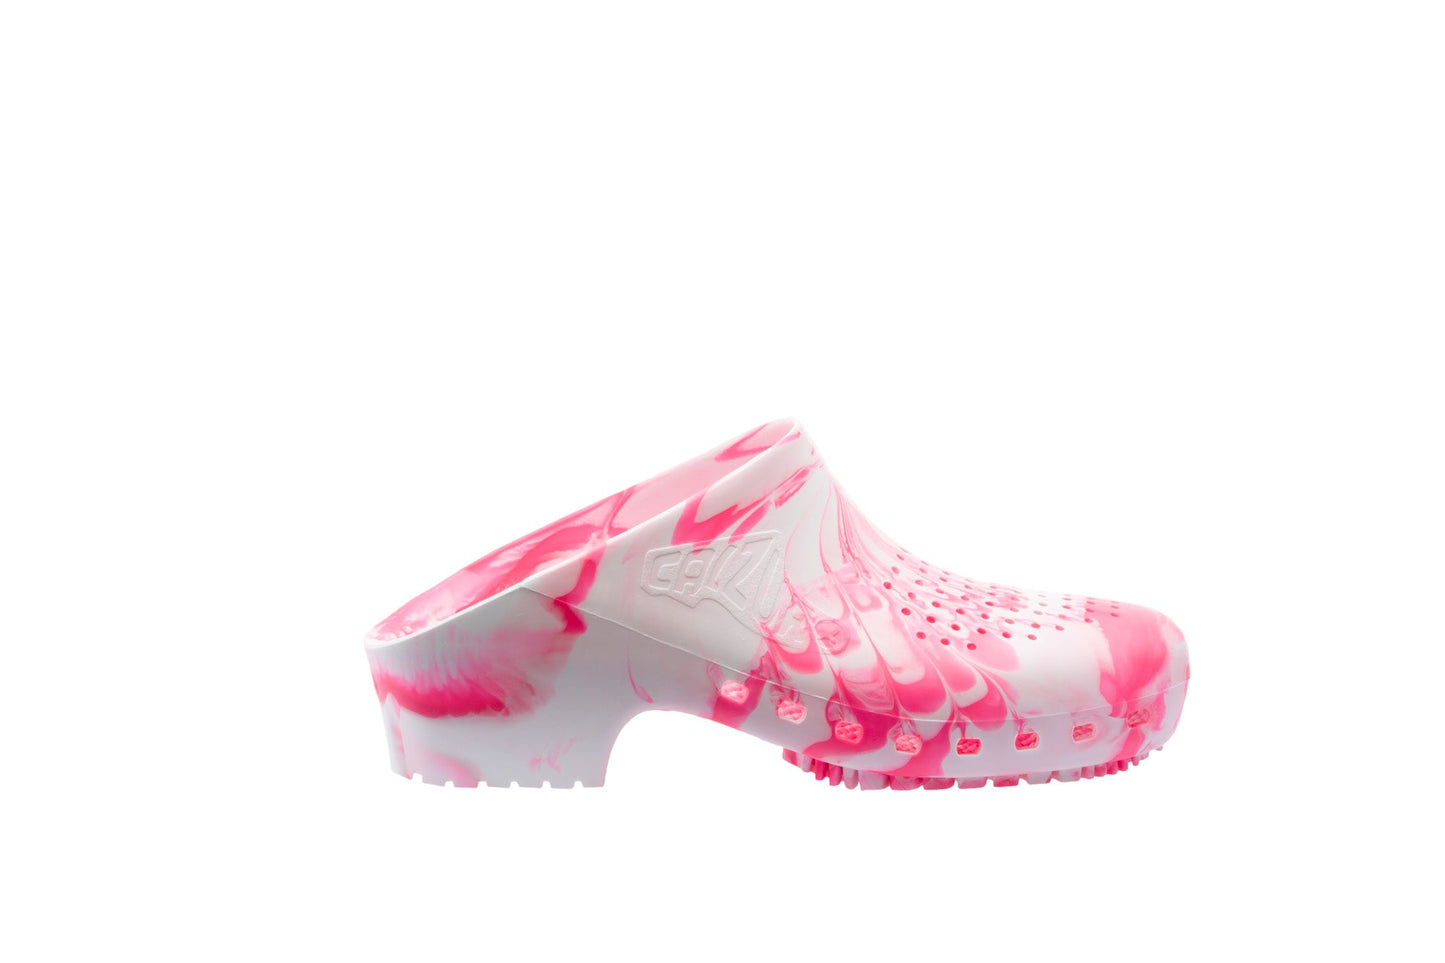 Calzuro Autoclavable Classic Clog WITH Upper Ventilation - Fancy Pink